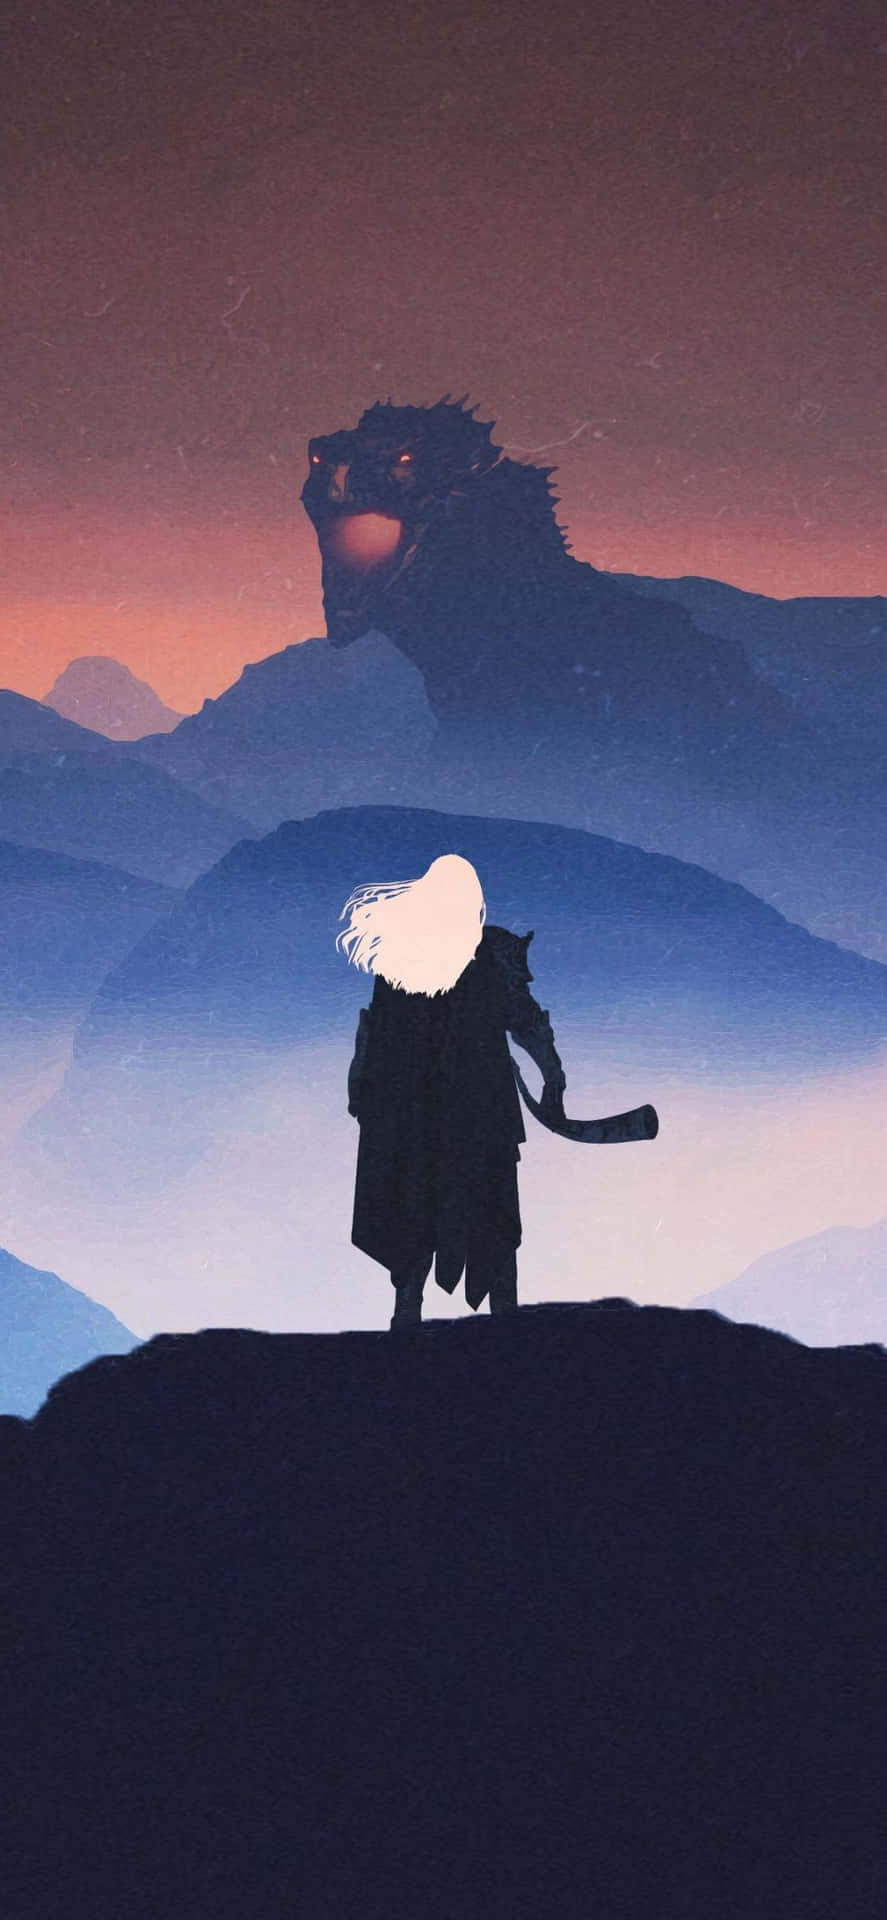 Explore the Seven Kingdoms with the Game Of Thrones Iphone Wallpaper